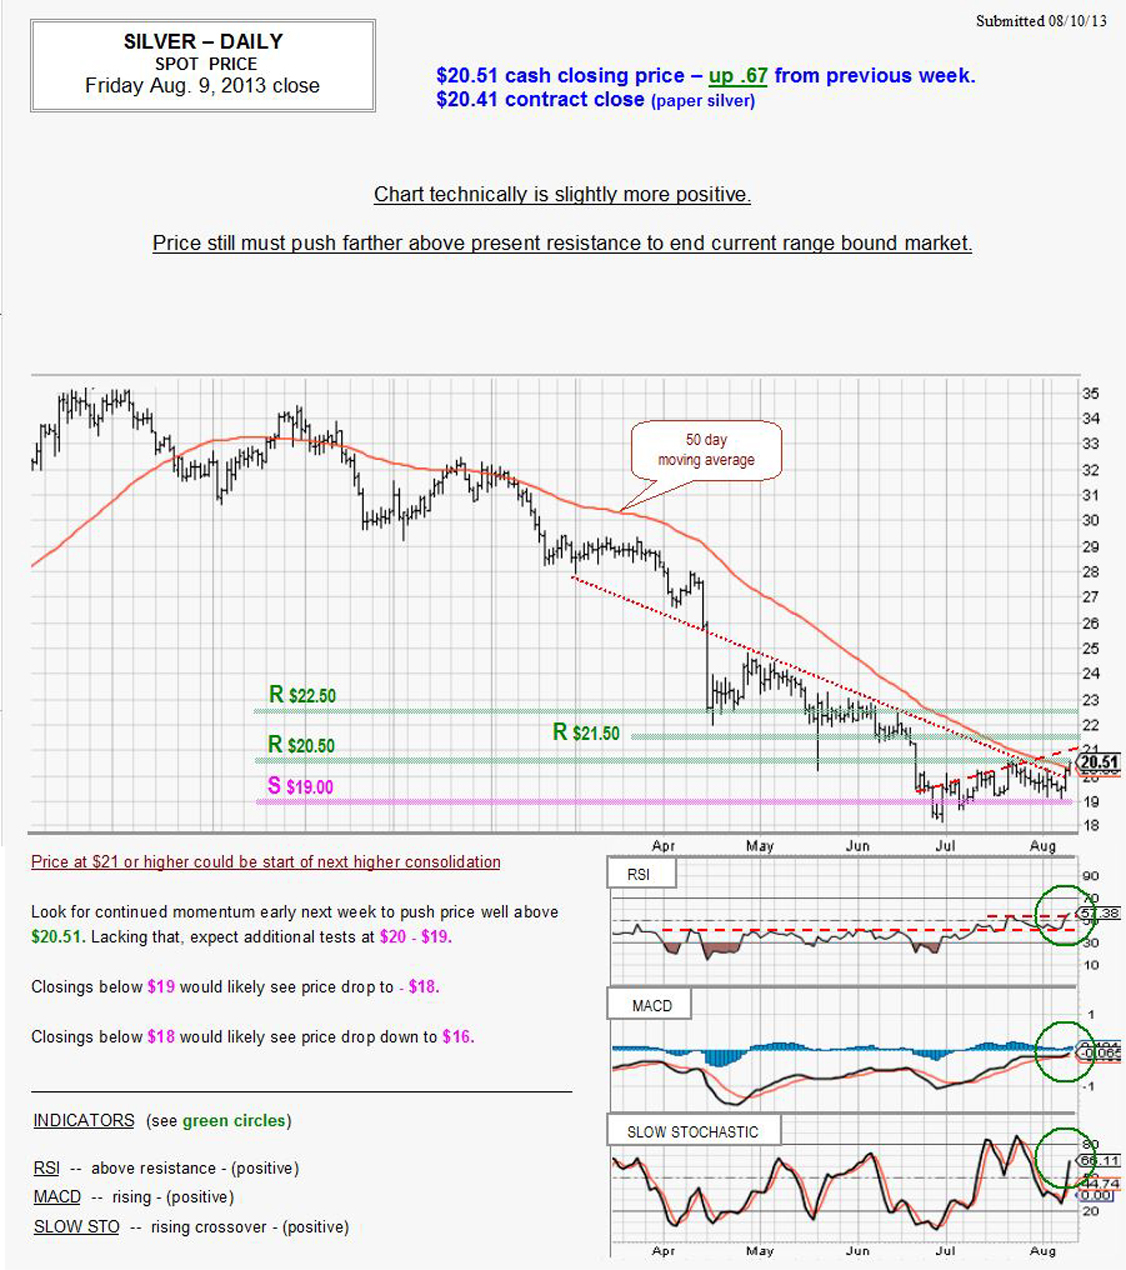 Aug 9, 2013 chart & commentary